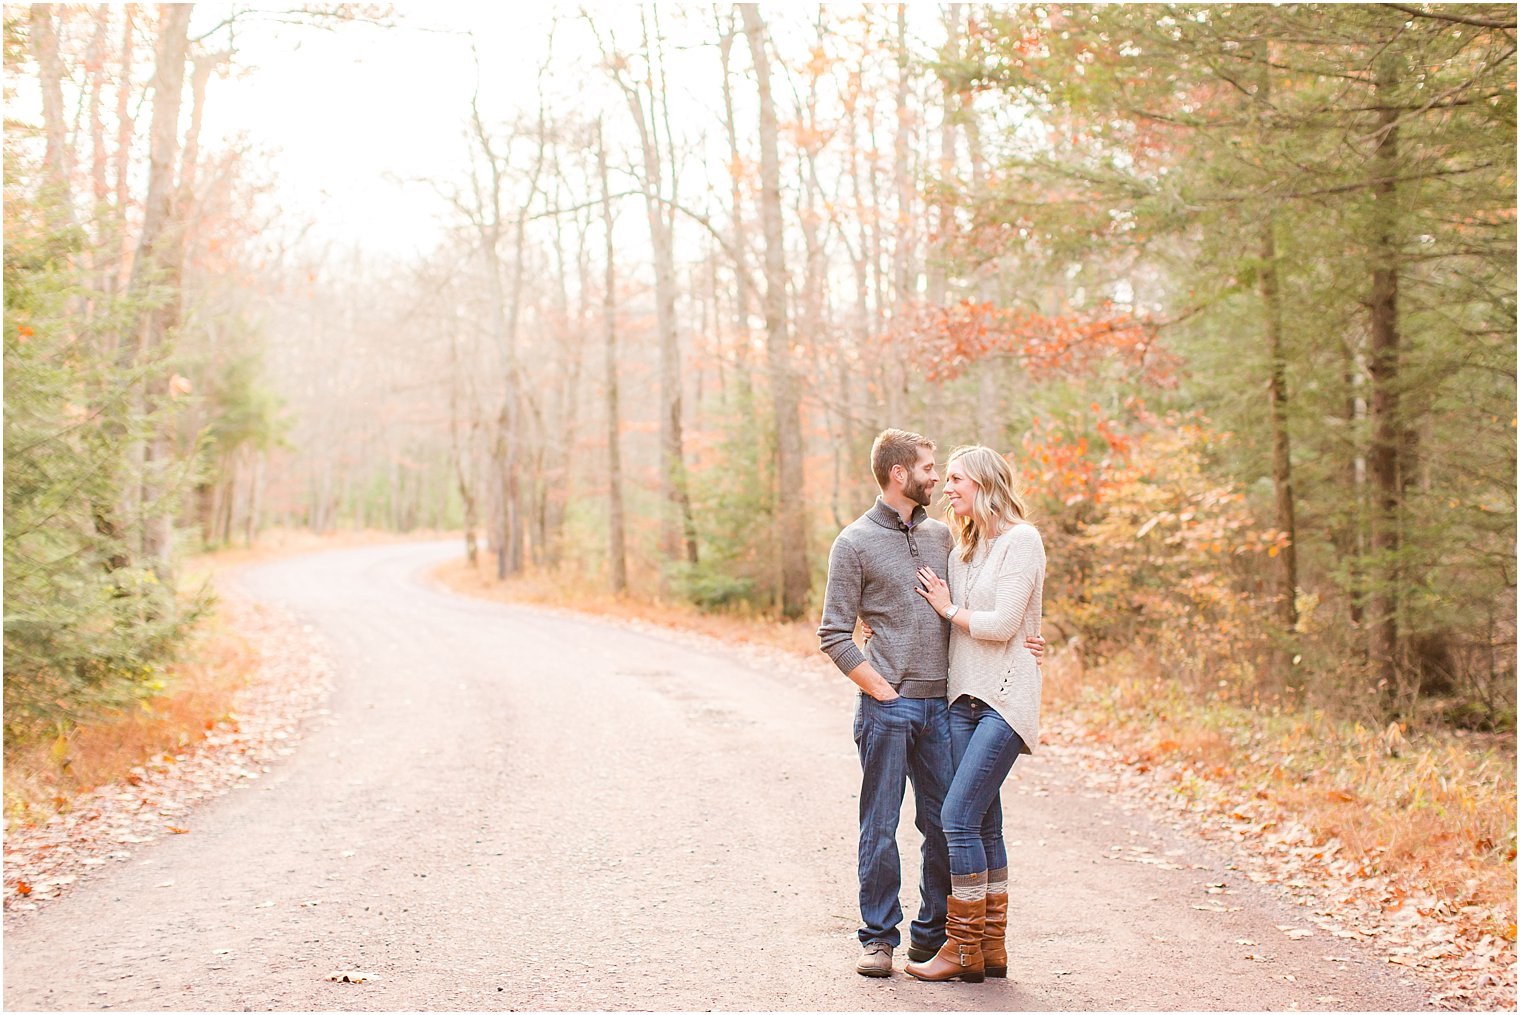 Romantic engagement photos with fall foliage